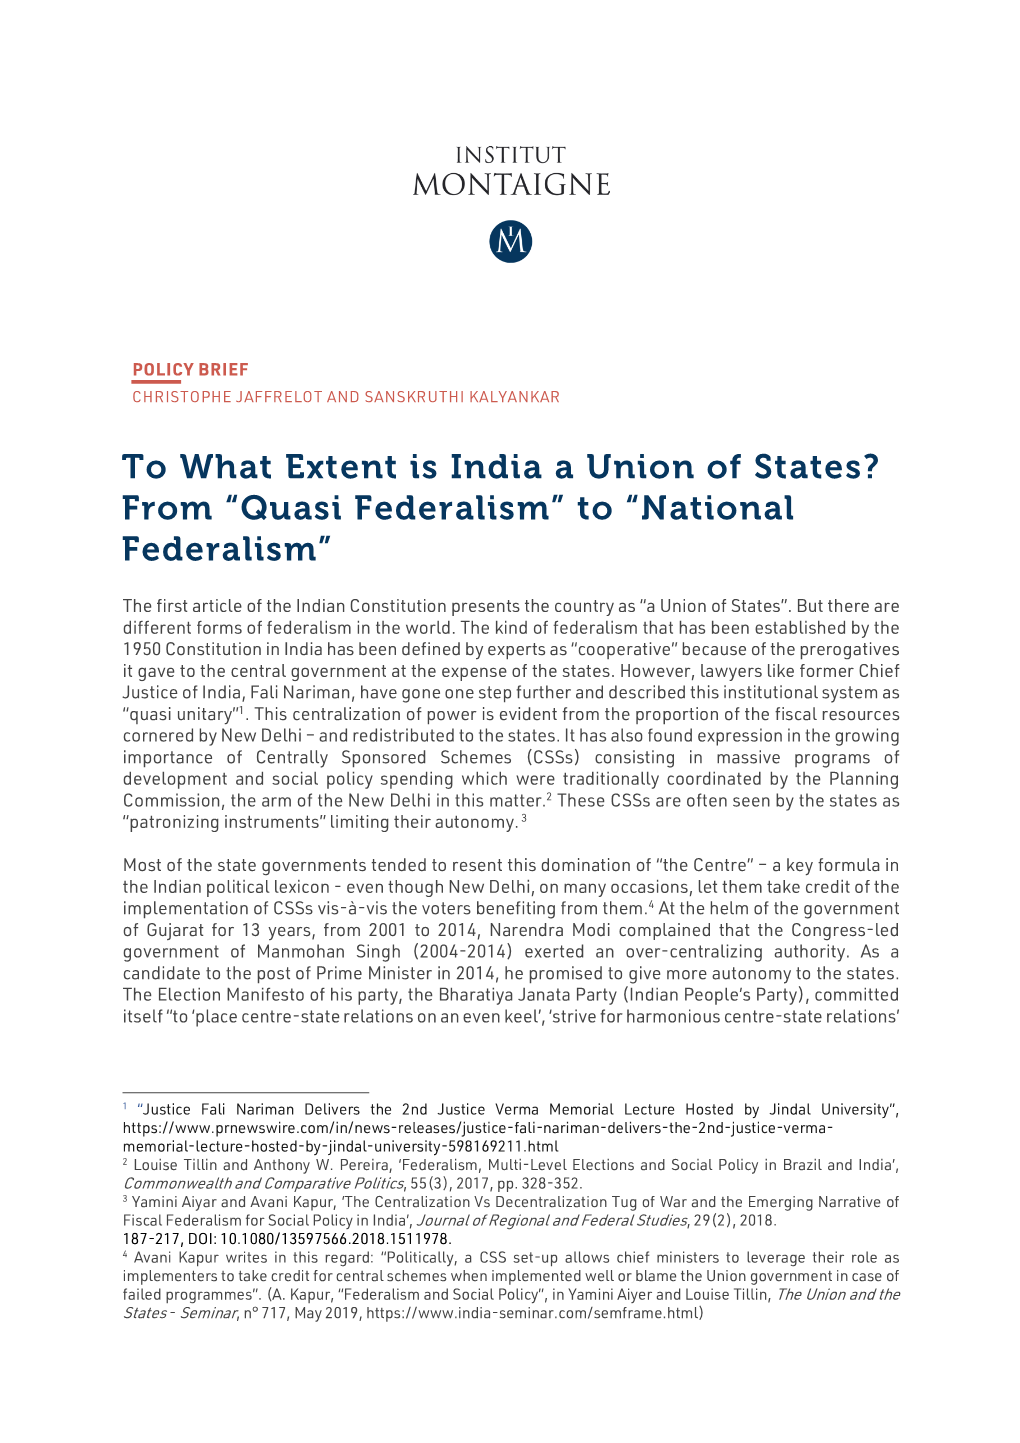 To What Extent Is India a Union of States?